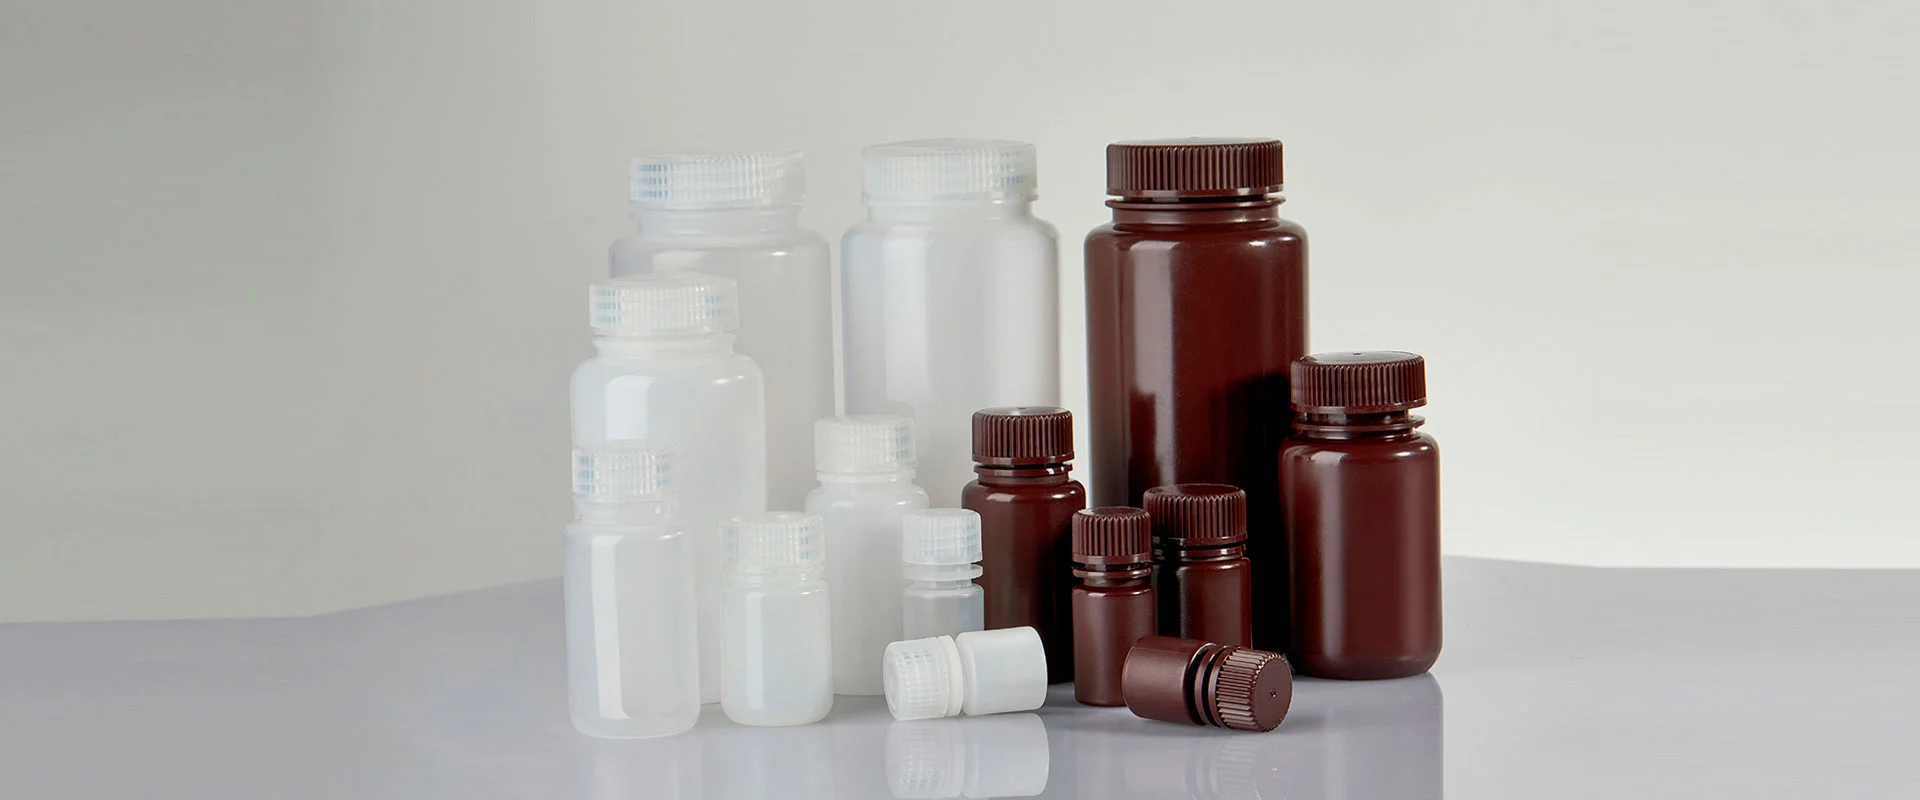 Leak Proof Water Bottles, Natural HDPE Narrow Mouth Bottles w/ Screw Caps